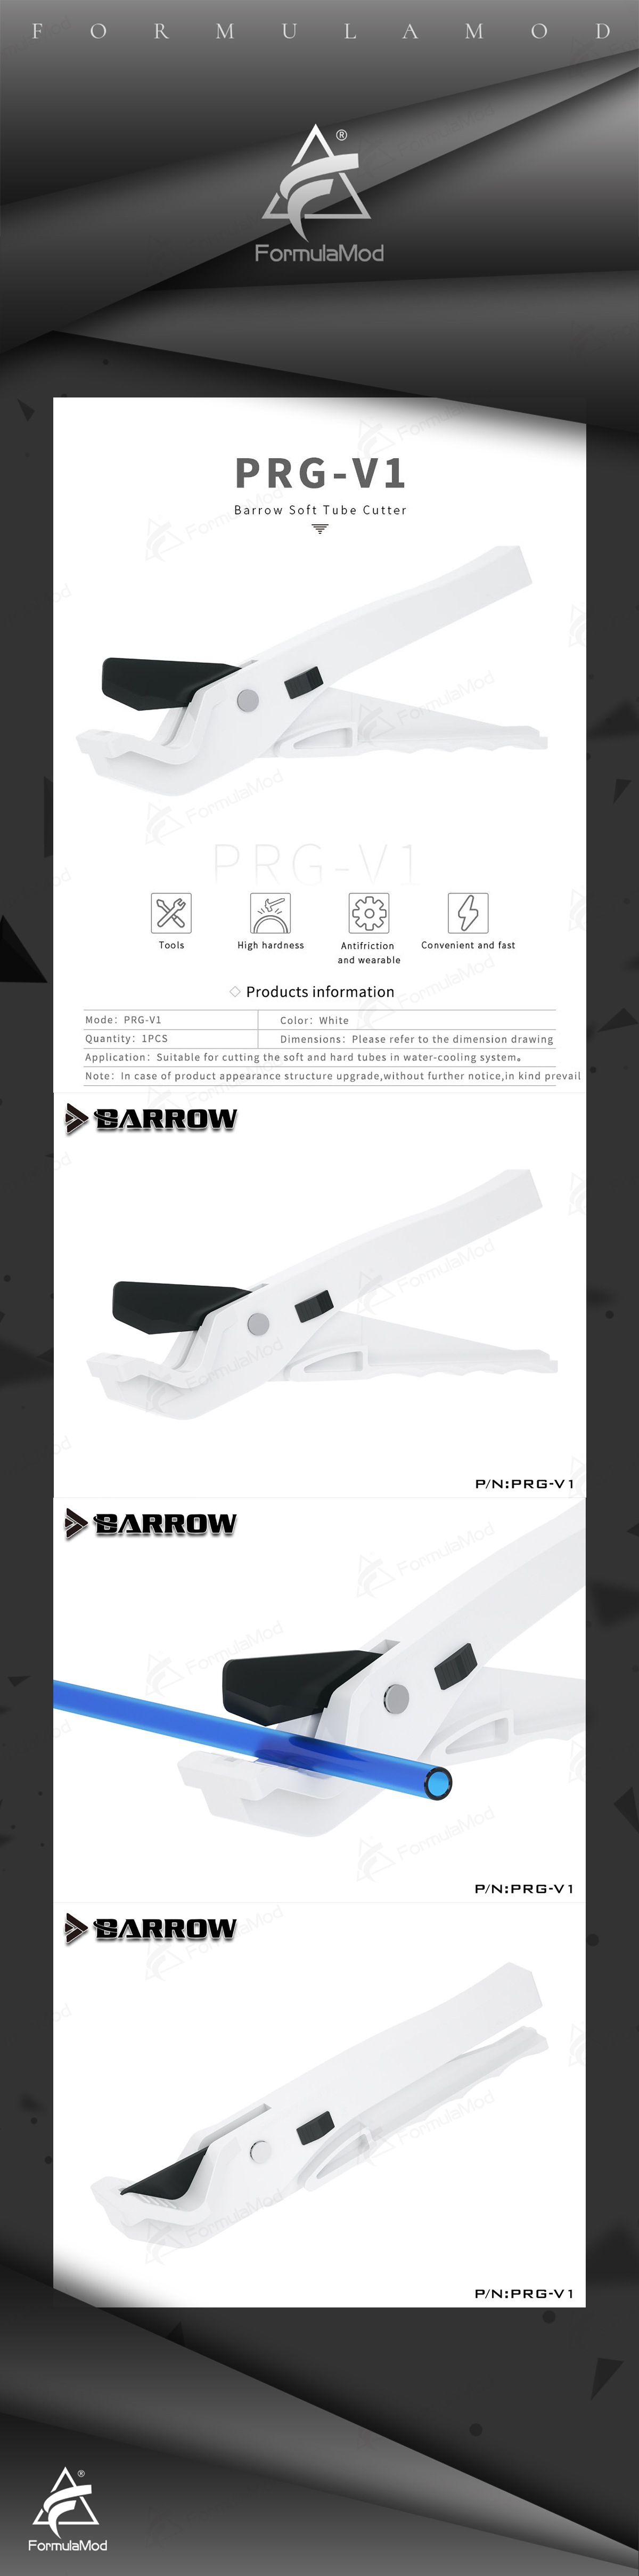 Barrow Tube Fast Cutter, For PETG Hard Tubes / PVC Soft Tubes, Fast Cutting, ABS Tube Tool With Protection Lock, Easy To Operate, PRG-V1  